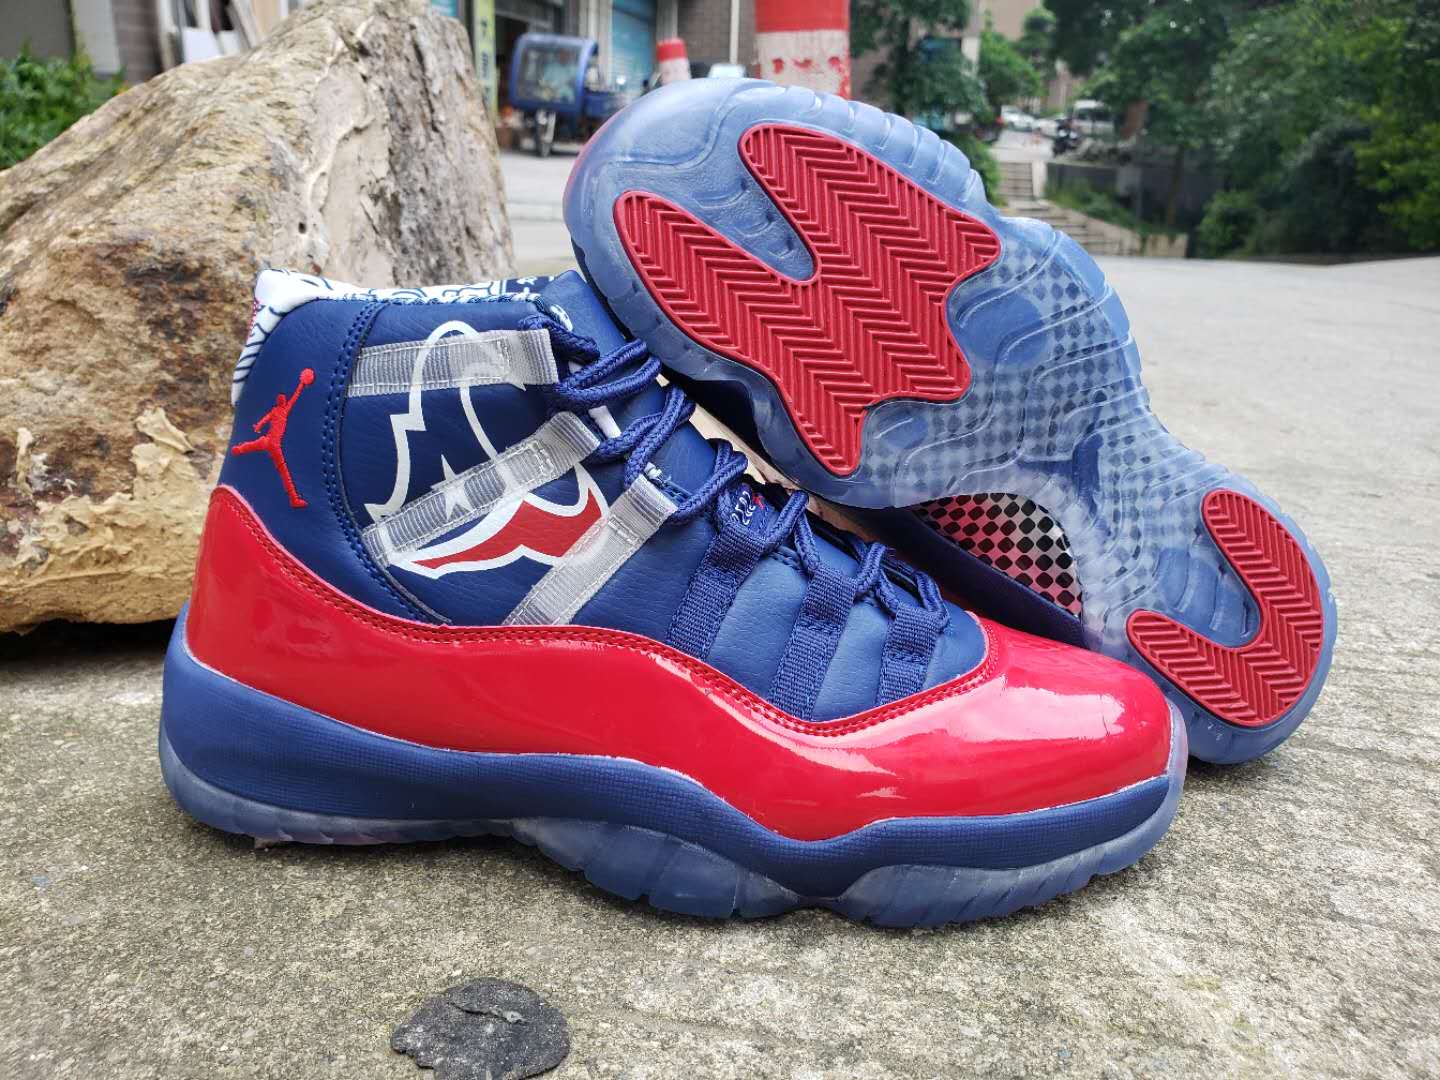 New Air Jordan 11 Championship Blue Red Shoes - Click Image to Close